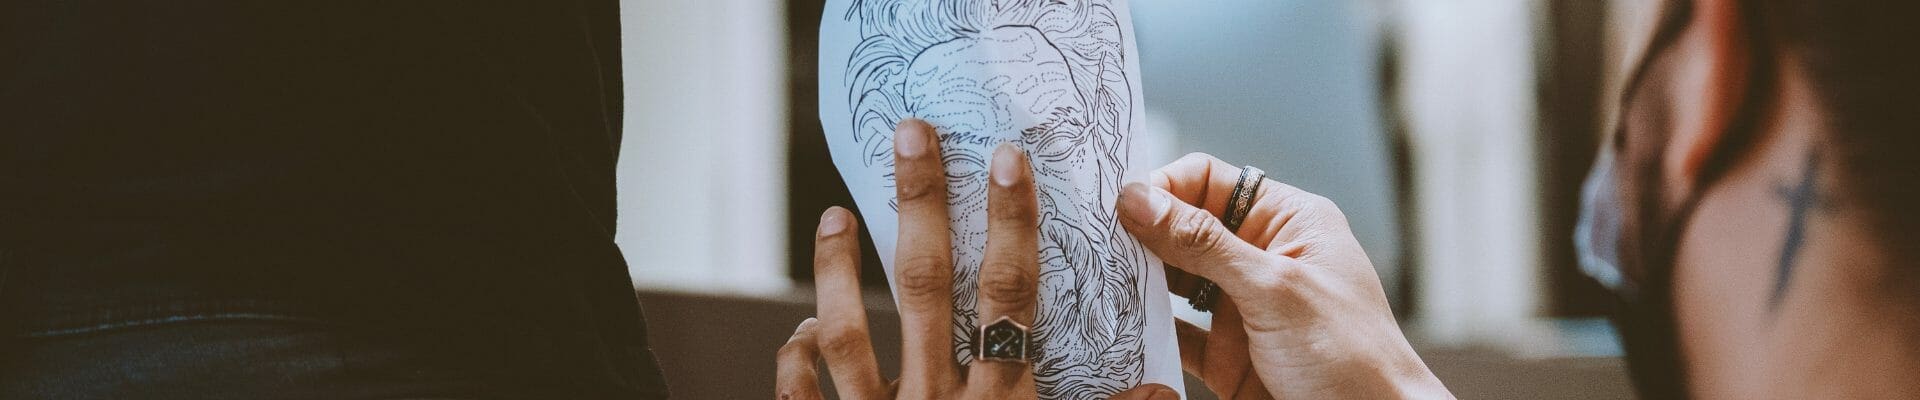 Your Guide to Realism Tattoos